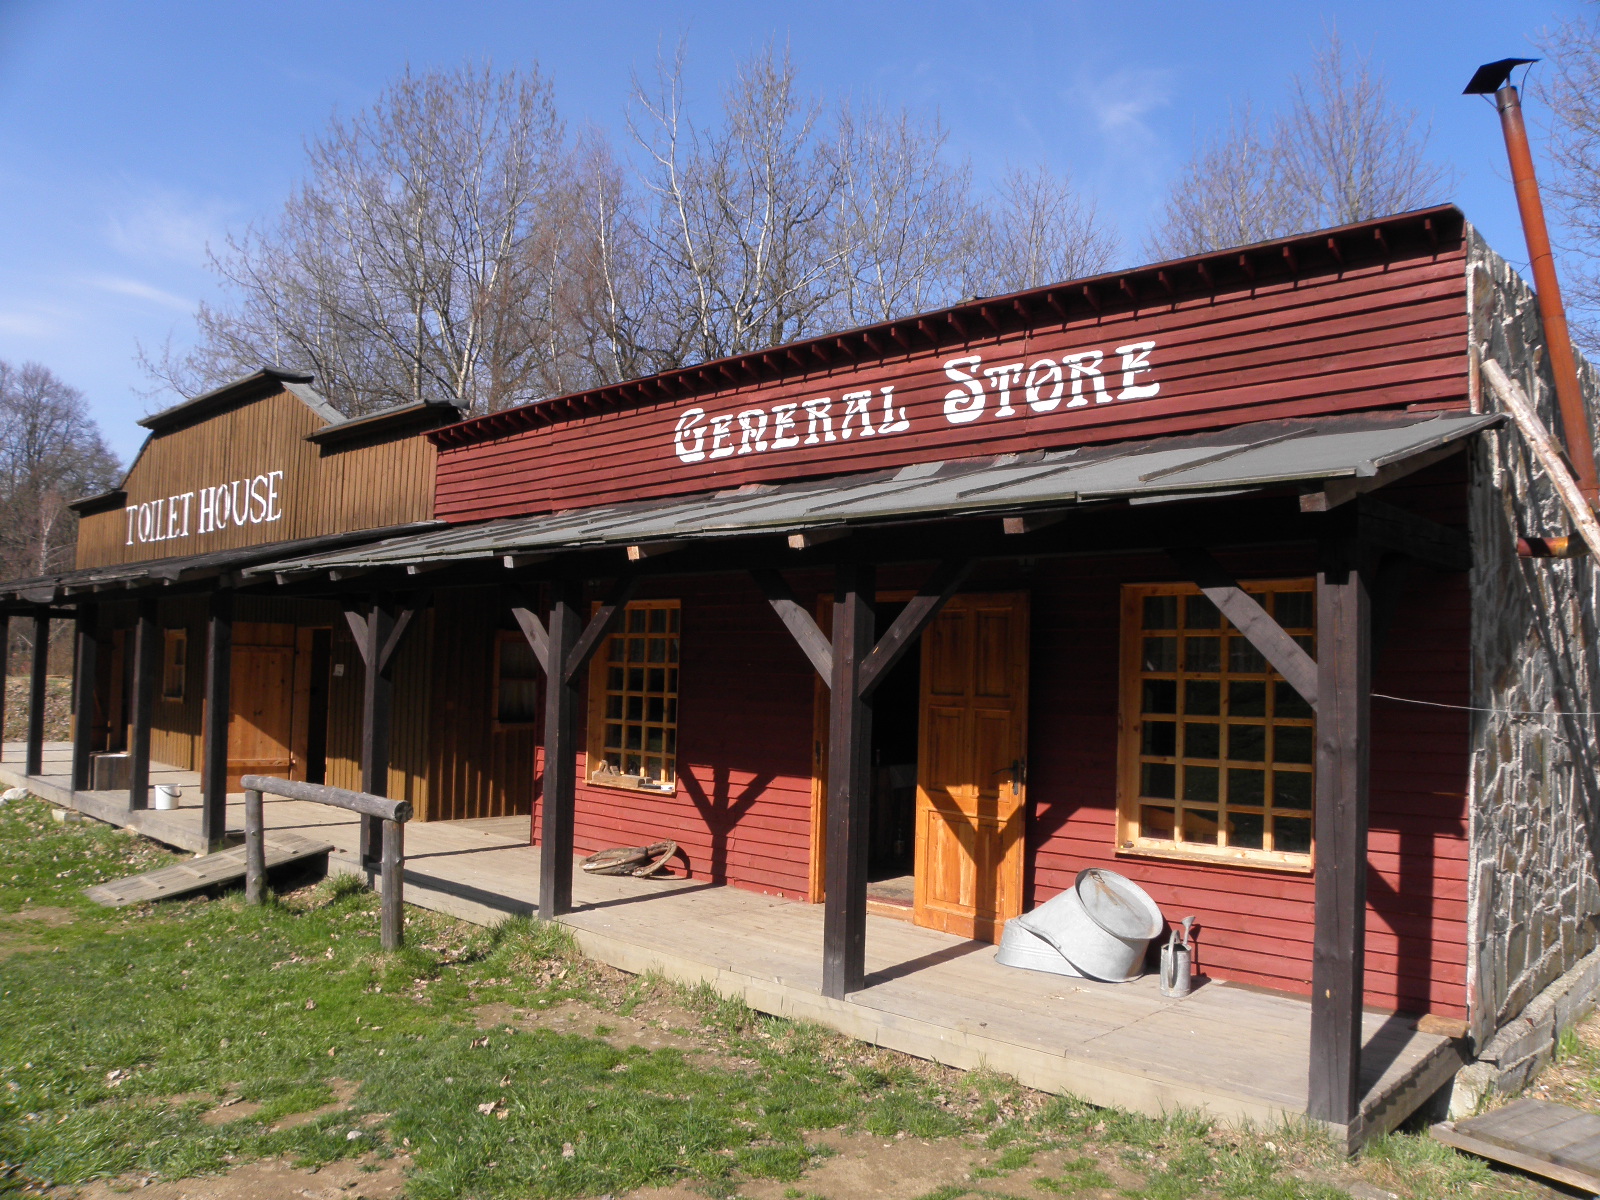 General Store a Toilet House